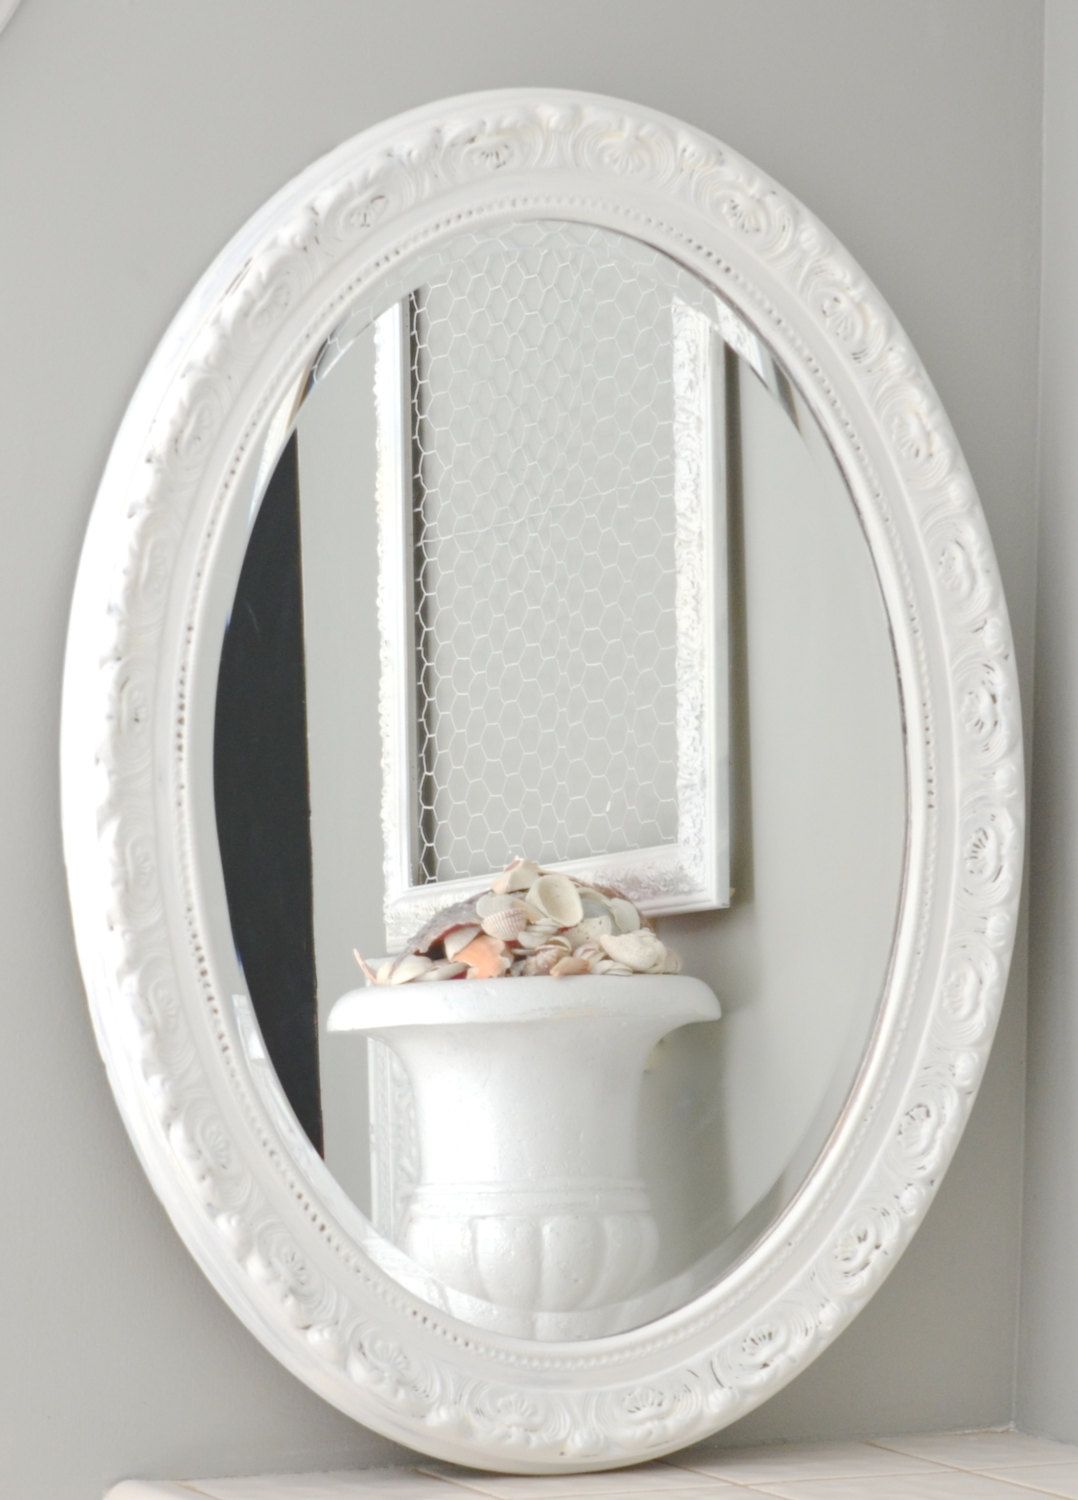 Sold Shab Chic White Oval Mirror Large Oval Shab Chic For Oval Shabby Chic Mirror (View 11 of 15)